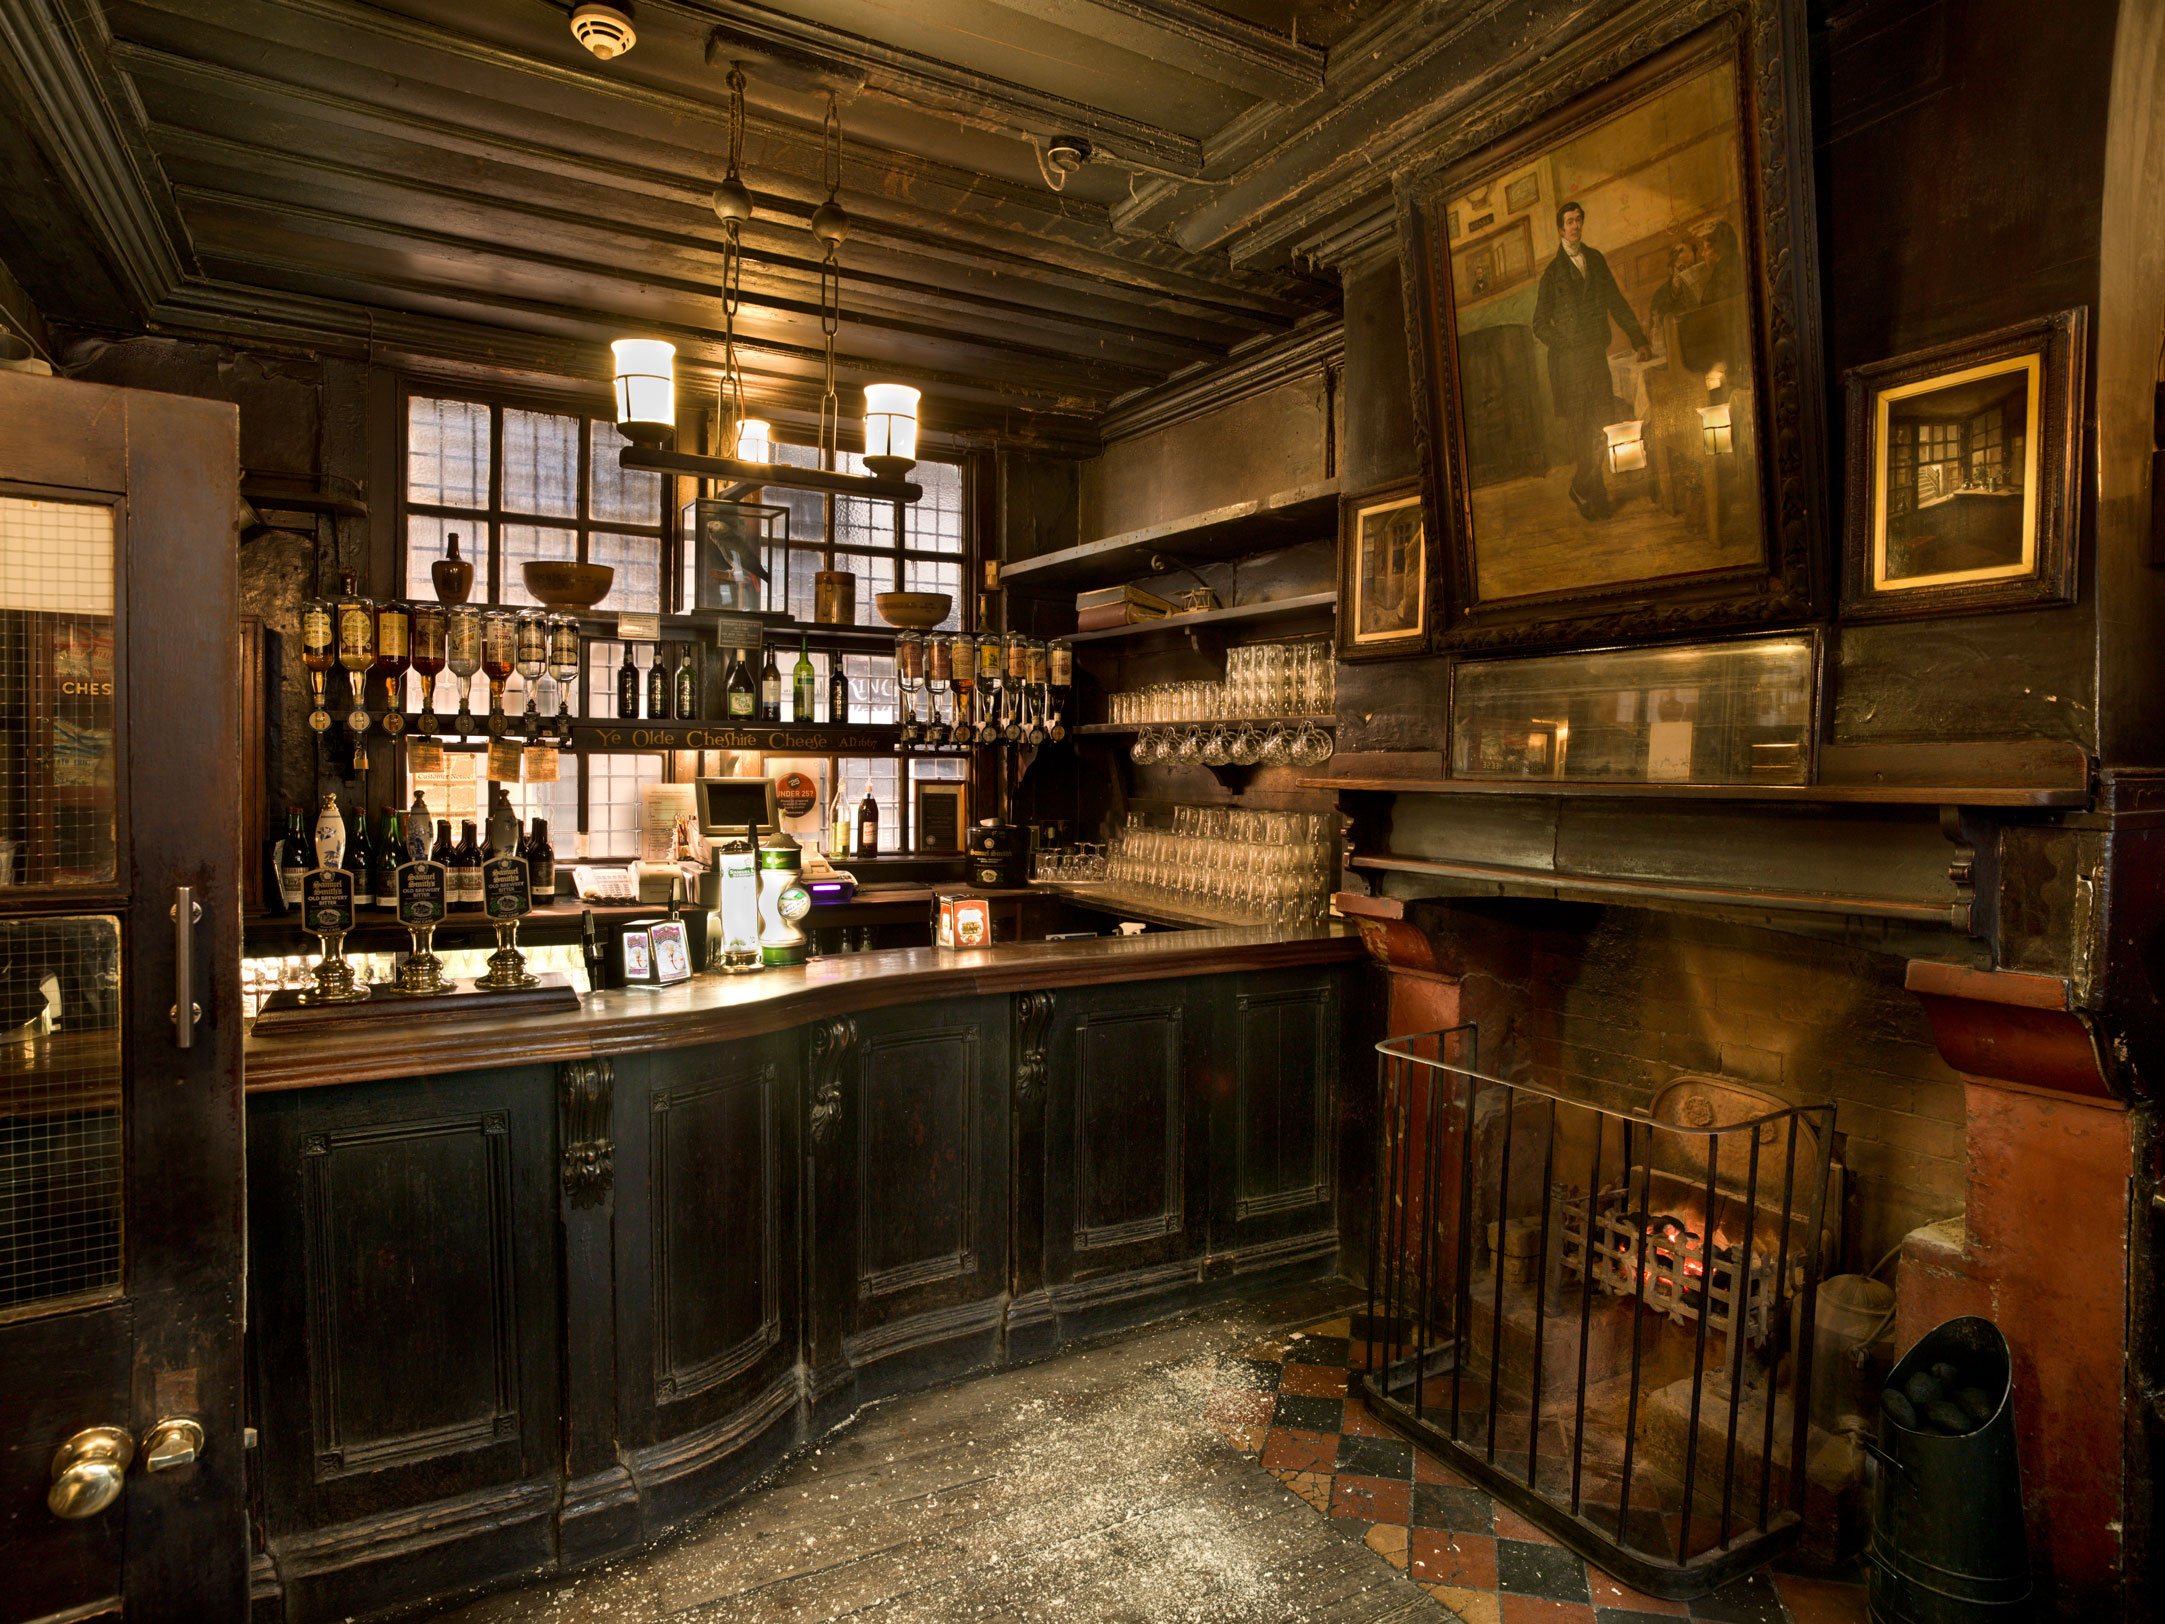 An interior detail of a bar area and fire place within a historic London public house.